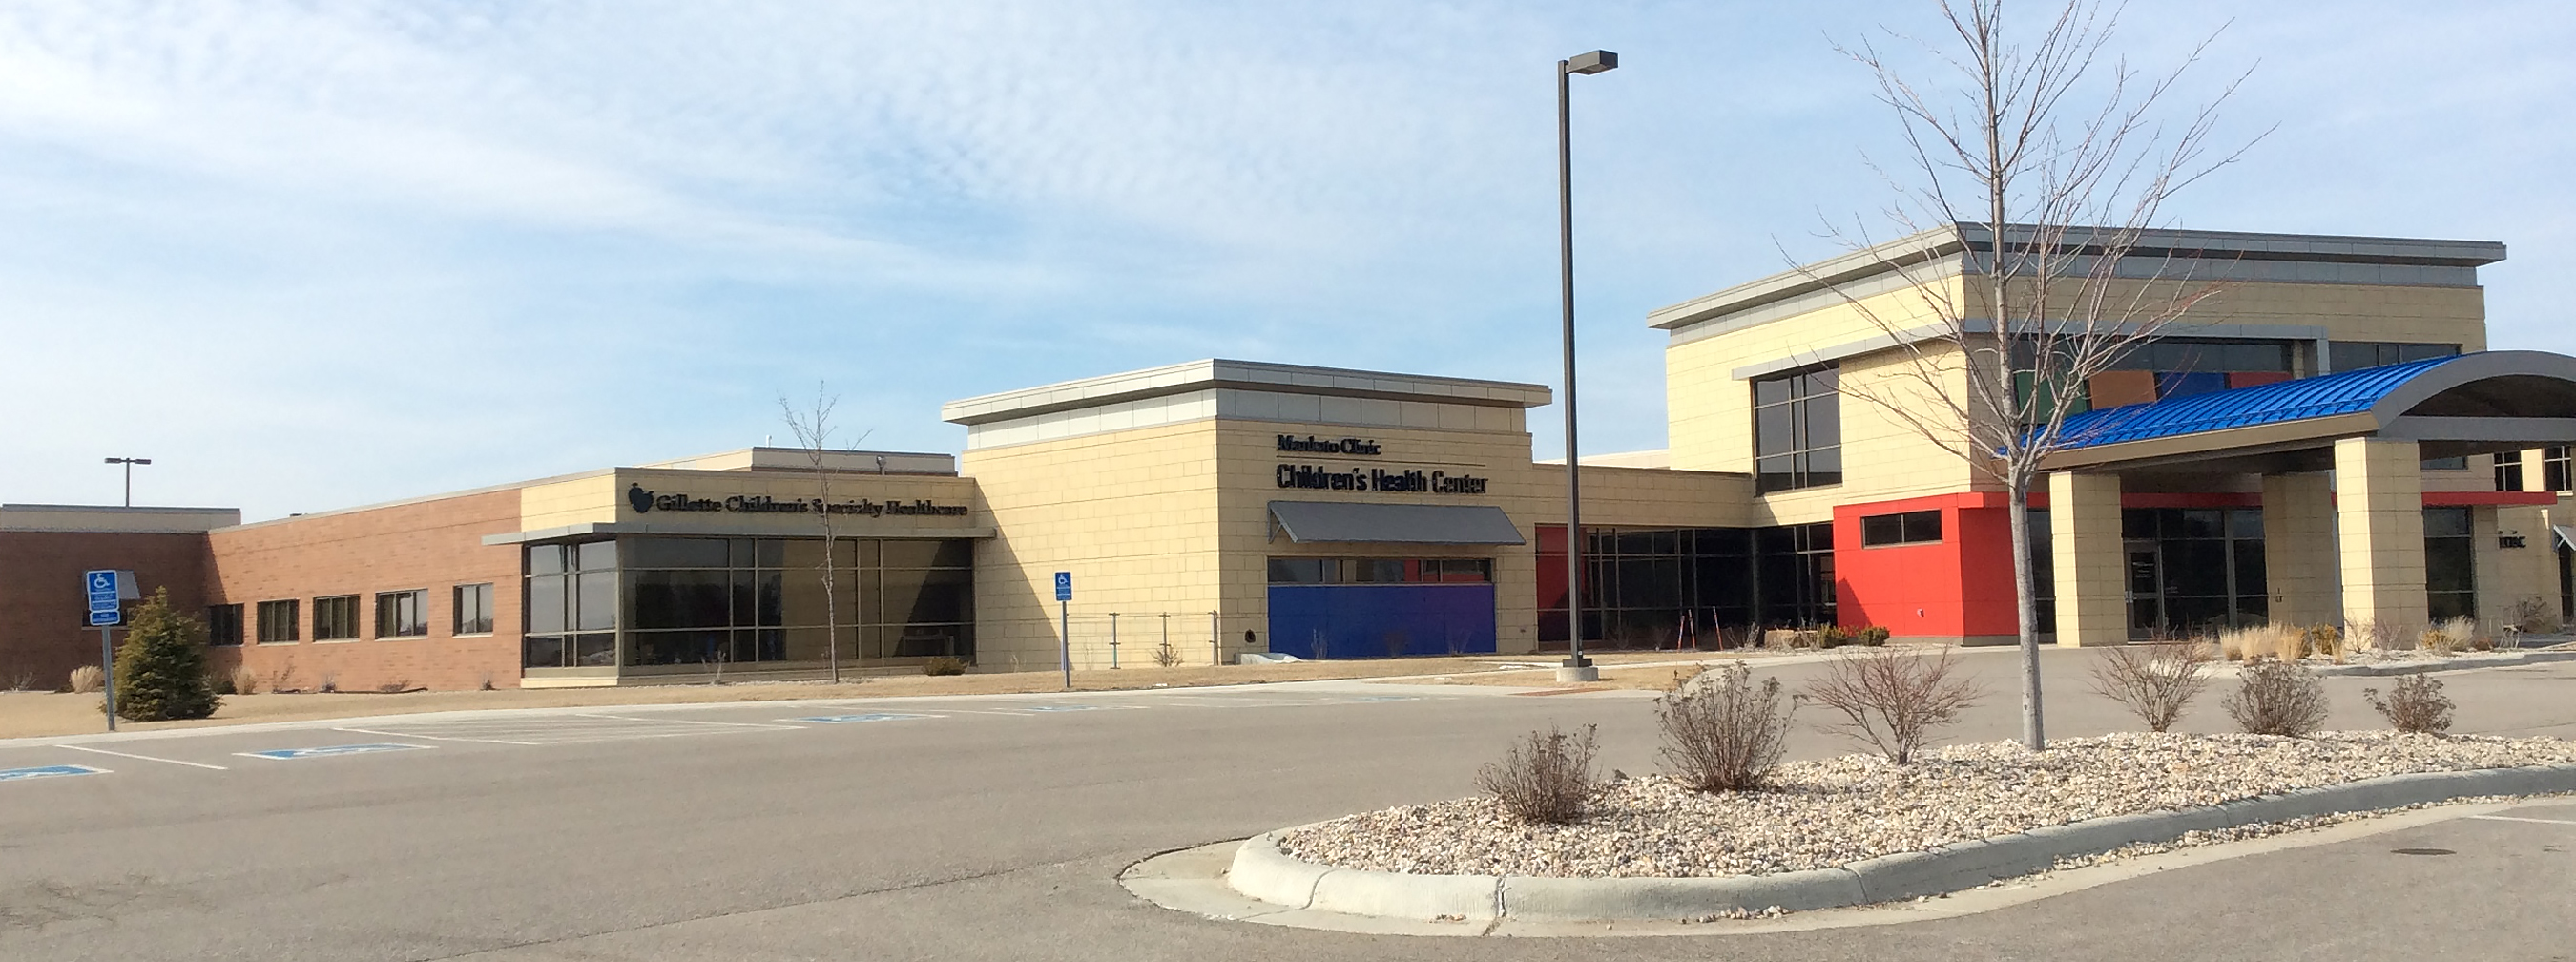 Children's Minnesota  St. Paul campus and specialty clinics